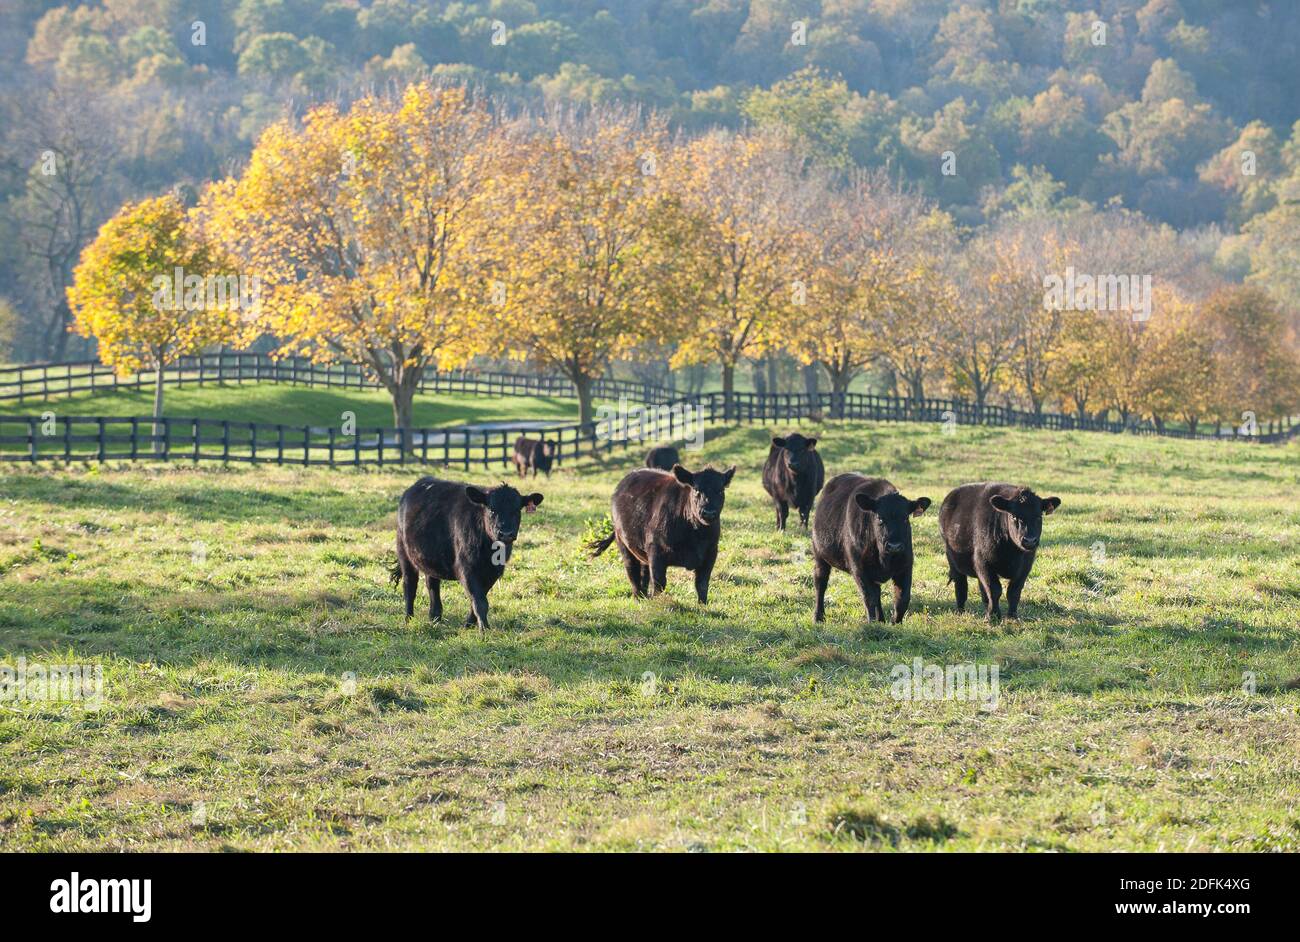 Black cattle graze in an agricultural field. Stock Photo